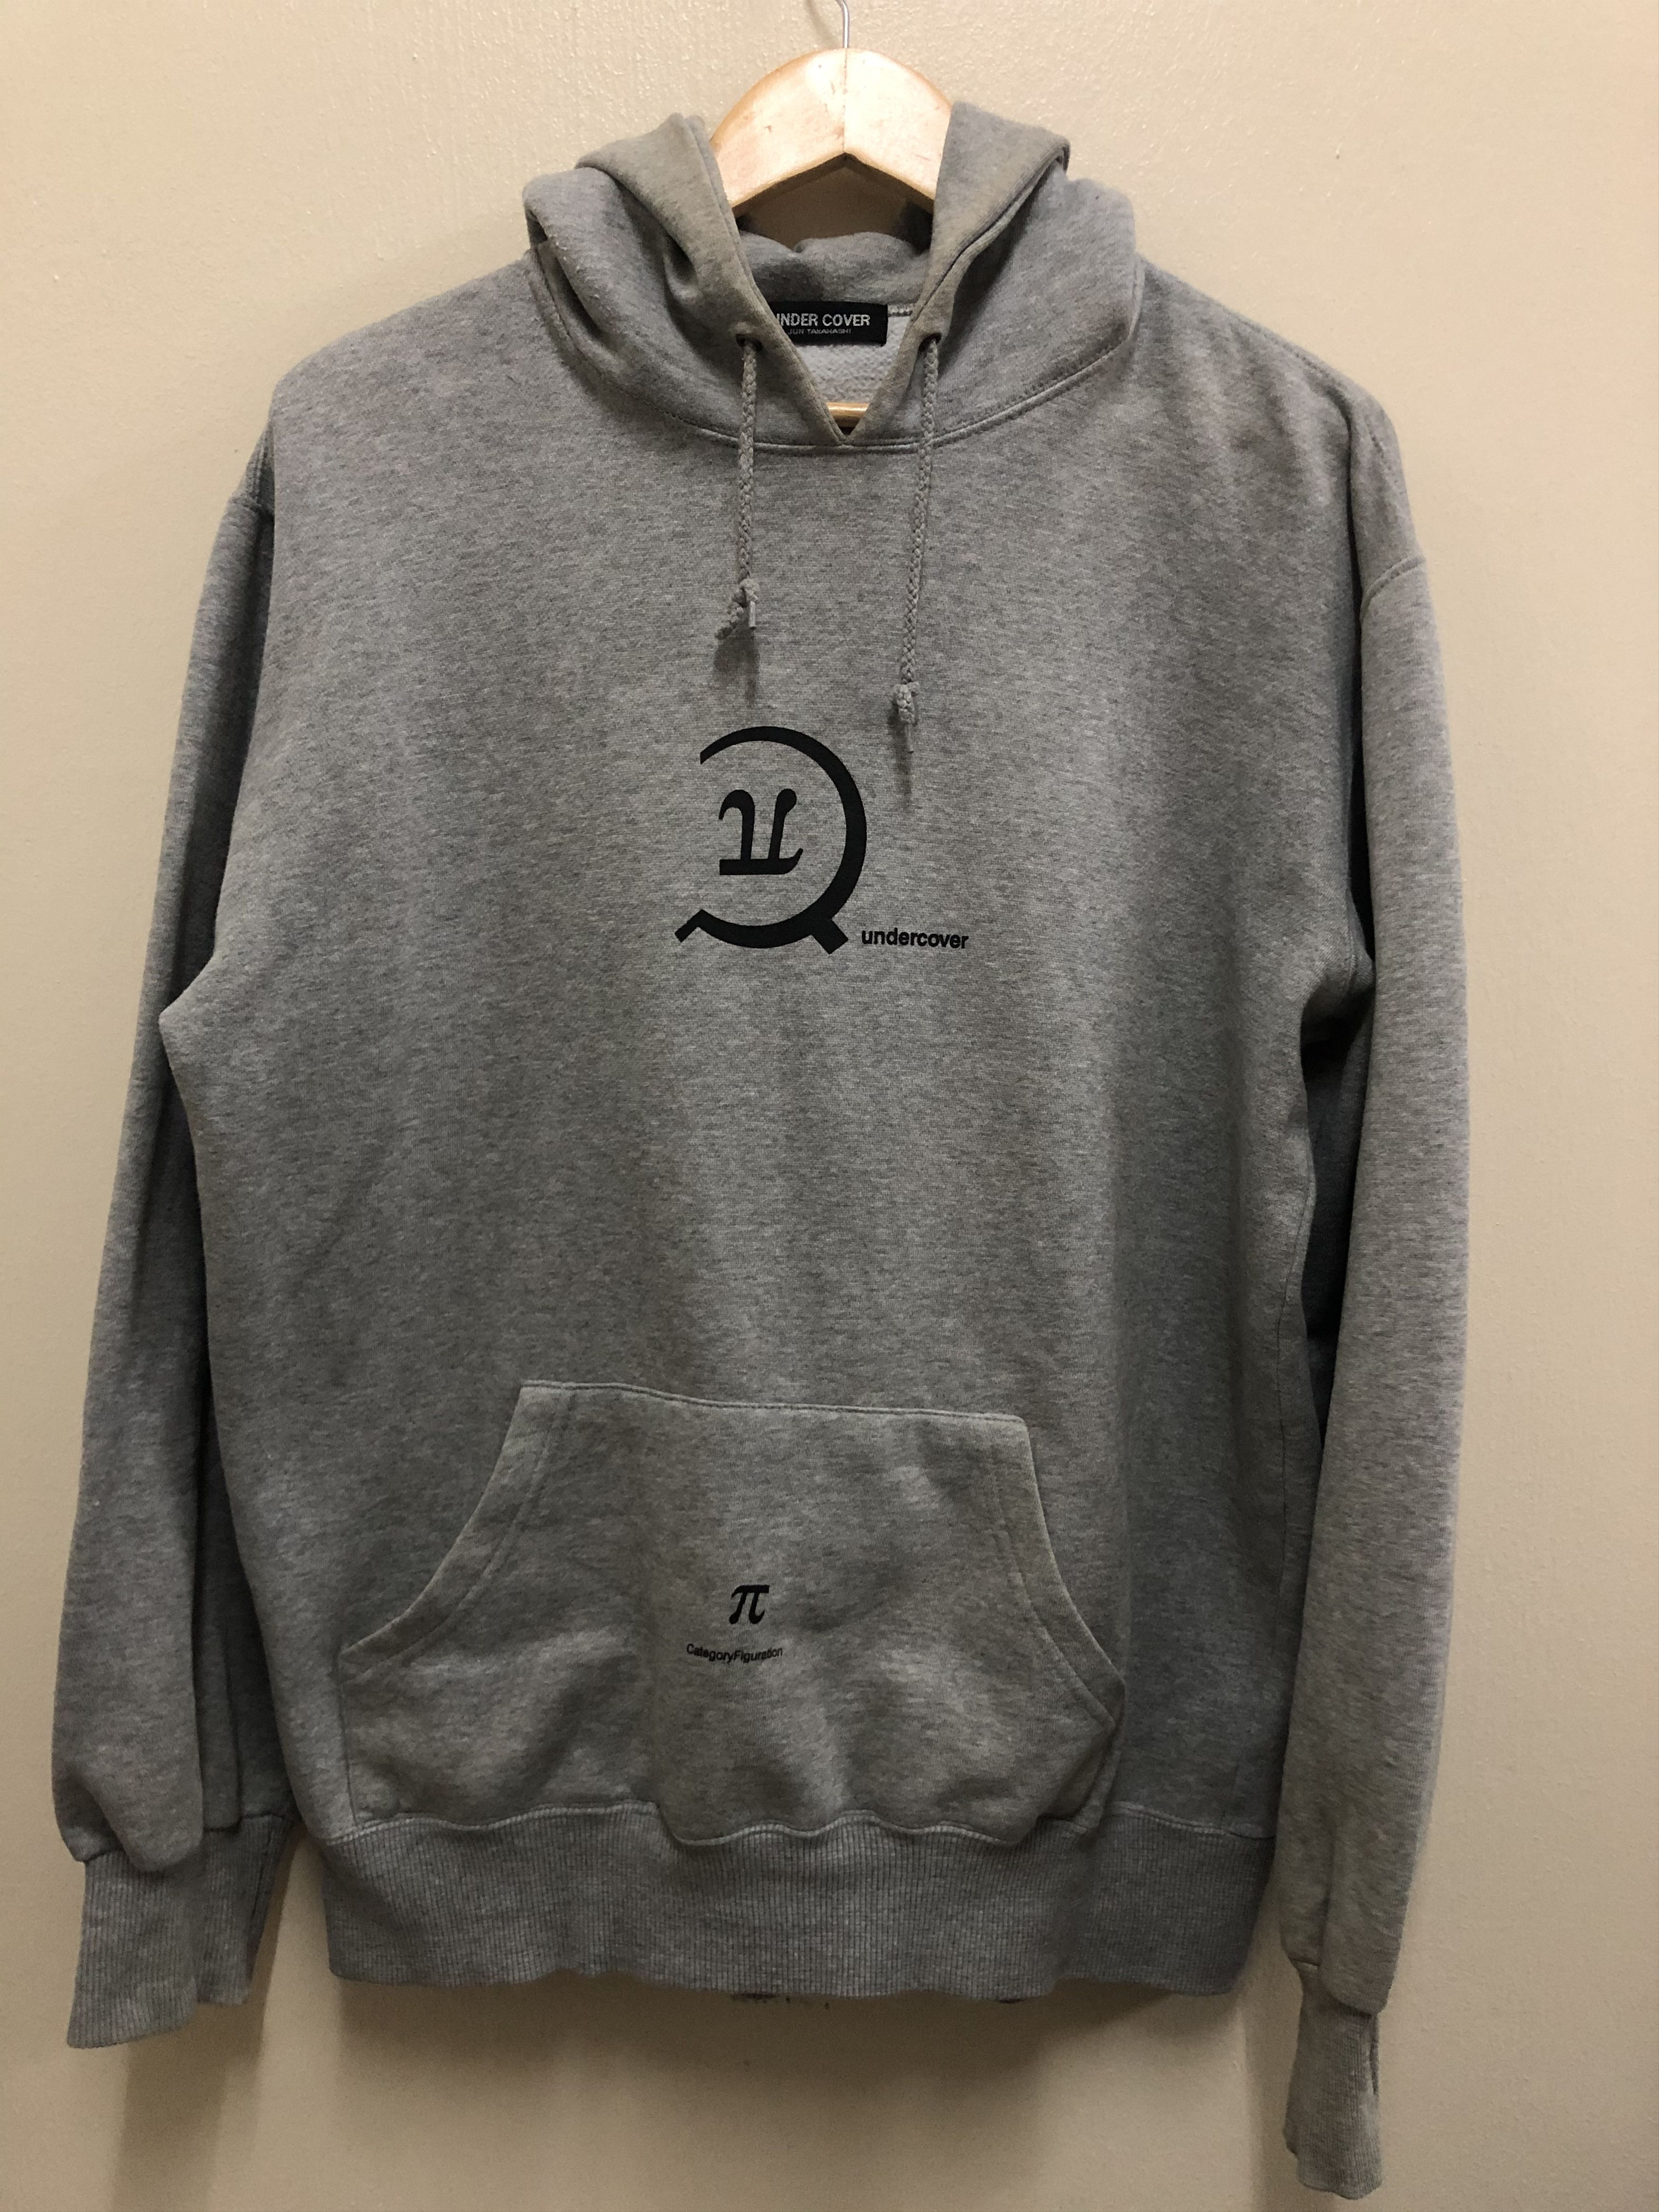 Undercover Undercover X Wtaps 99' UpArmored Hoodie | Grailed